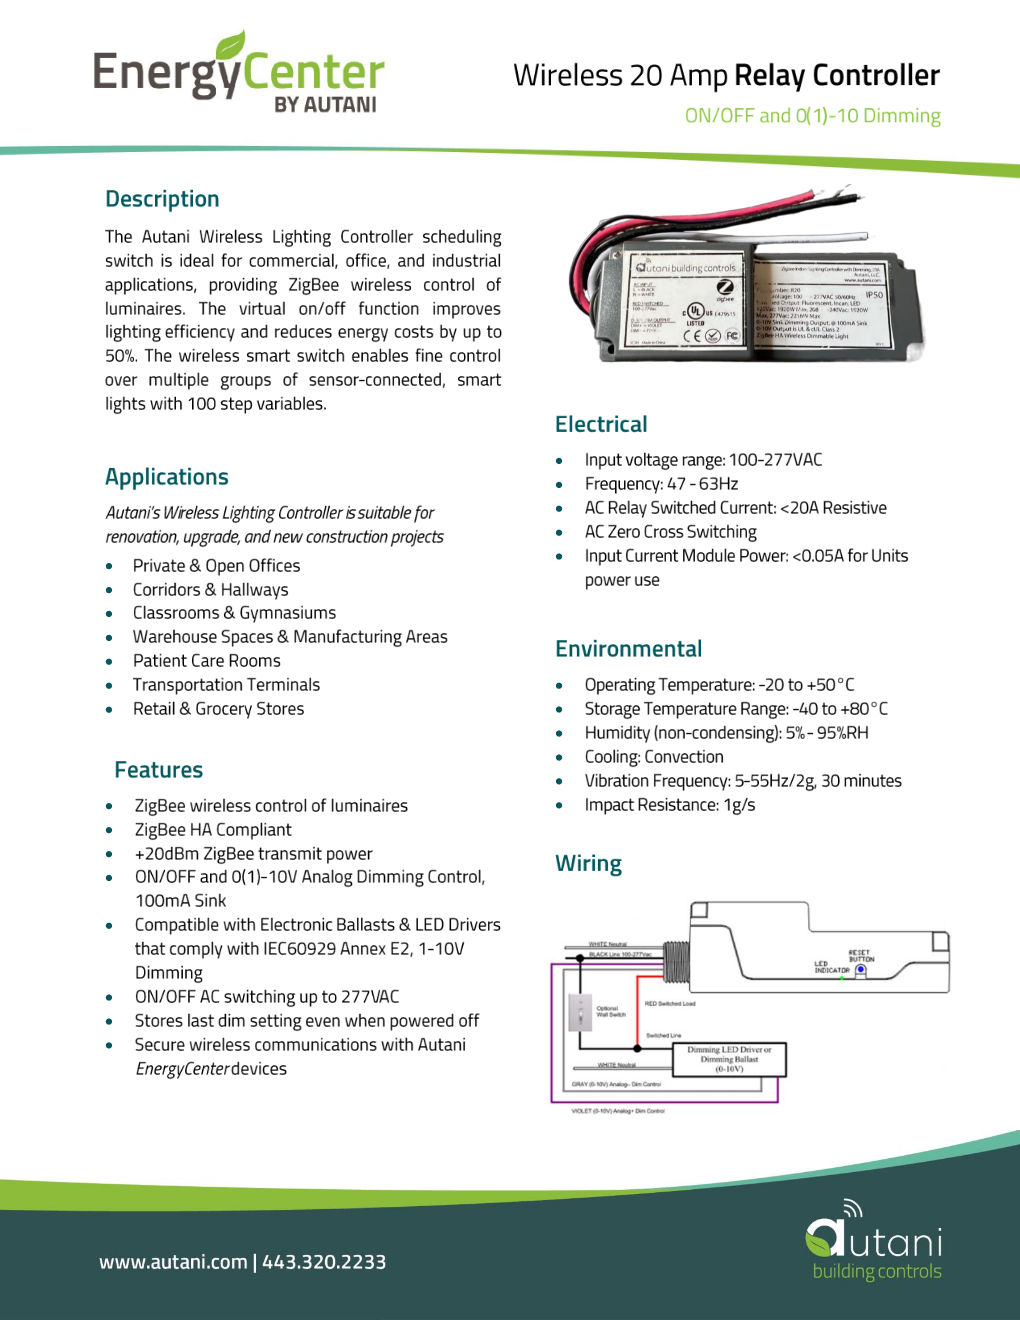 AUTANI_WIRELESS_20AMP_RELAY_CONTROLLER_20220719_Page_001.png